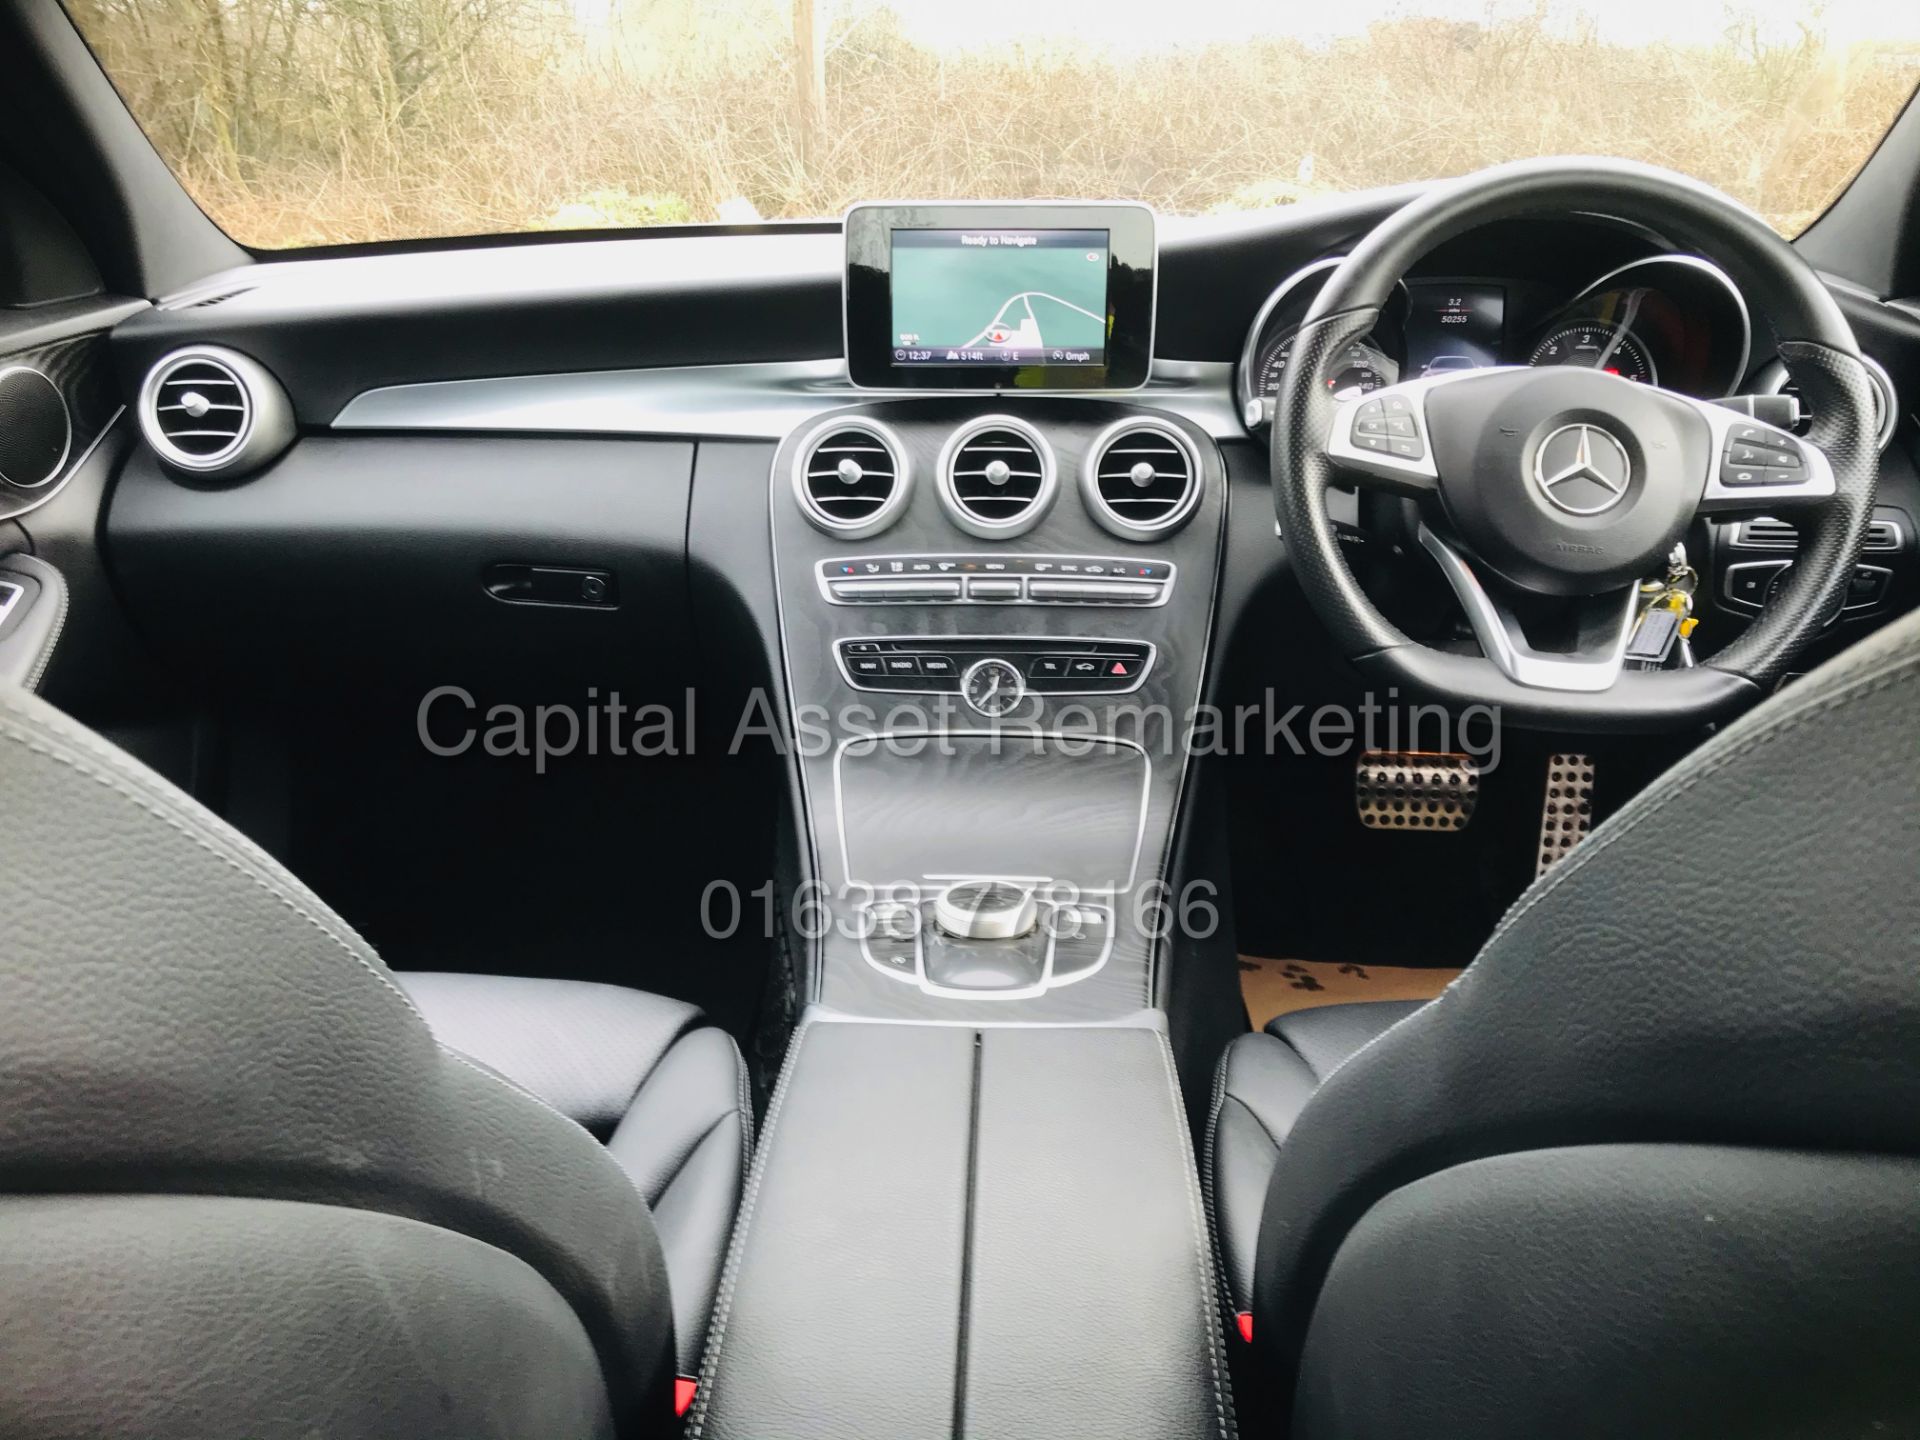 On Sale MERCEDES C220D "AMG-LINE" 9G TRONIC SALOON (18 REG) 1 OWNER WITH HISTORY - SAT NAV - - Image 13 of 36